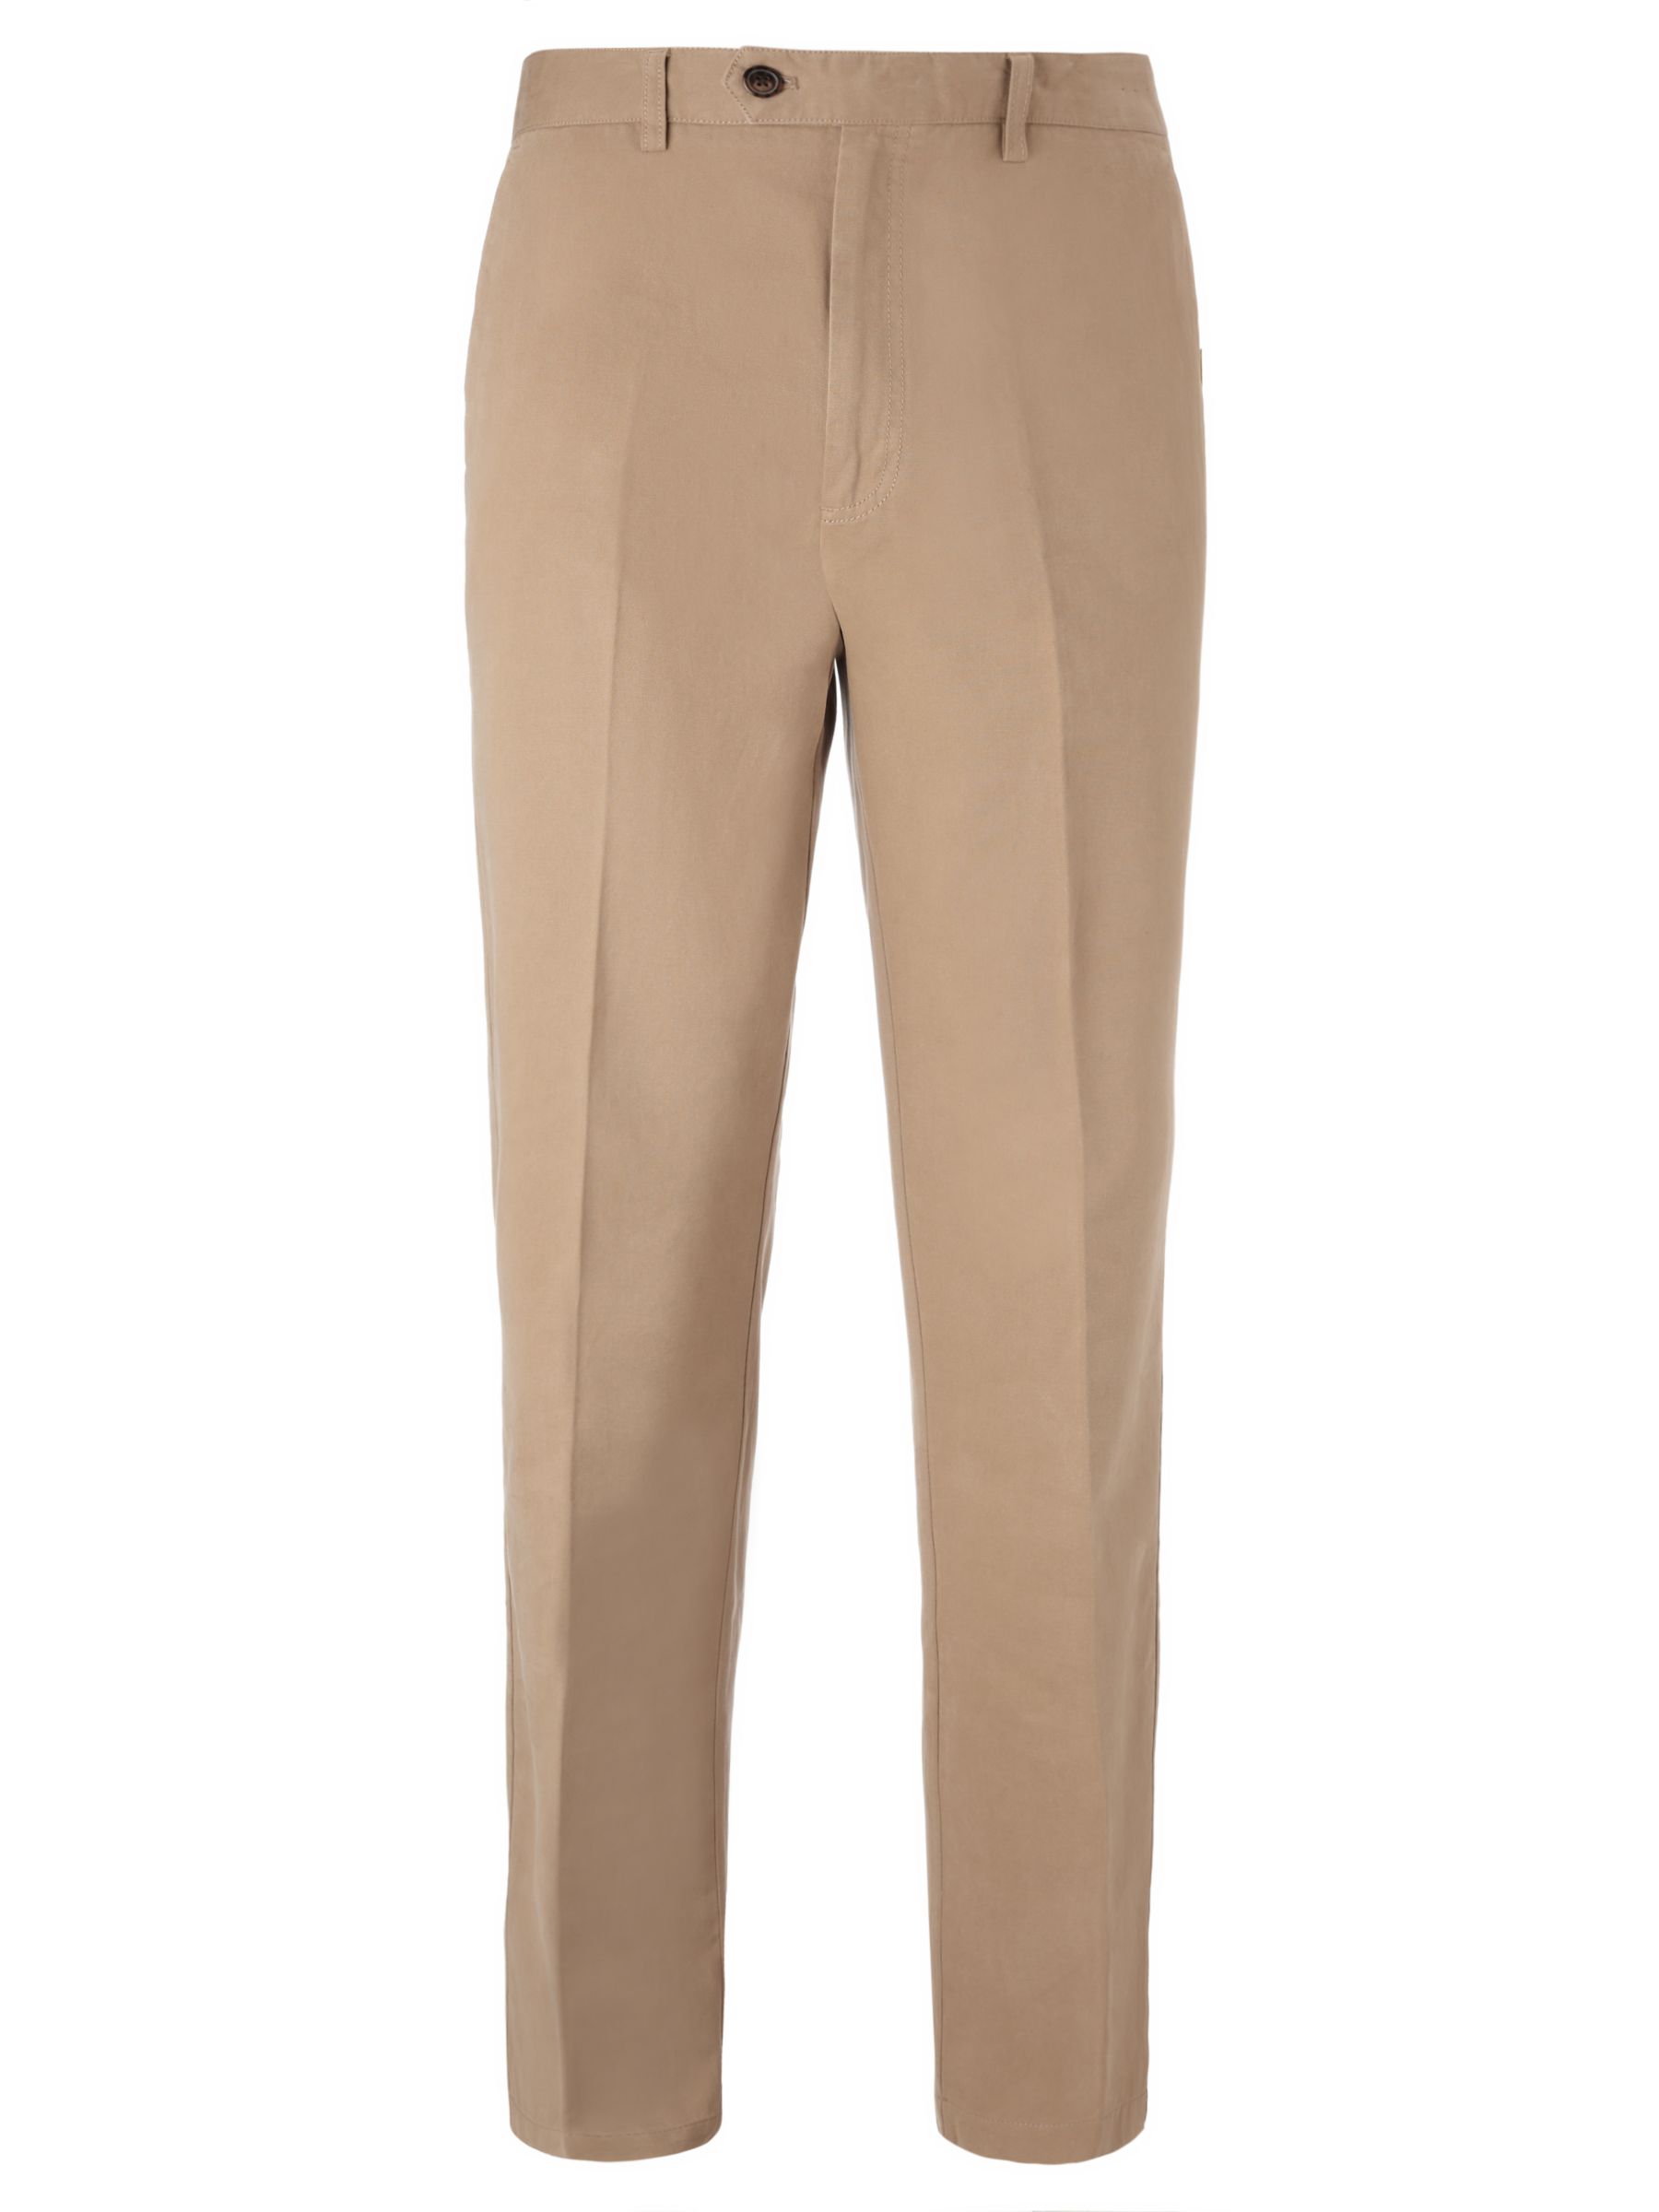 John Lewis & Partners Wrinkle Free Flat Front Trousers, Stone, 38S